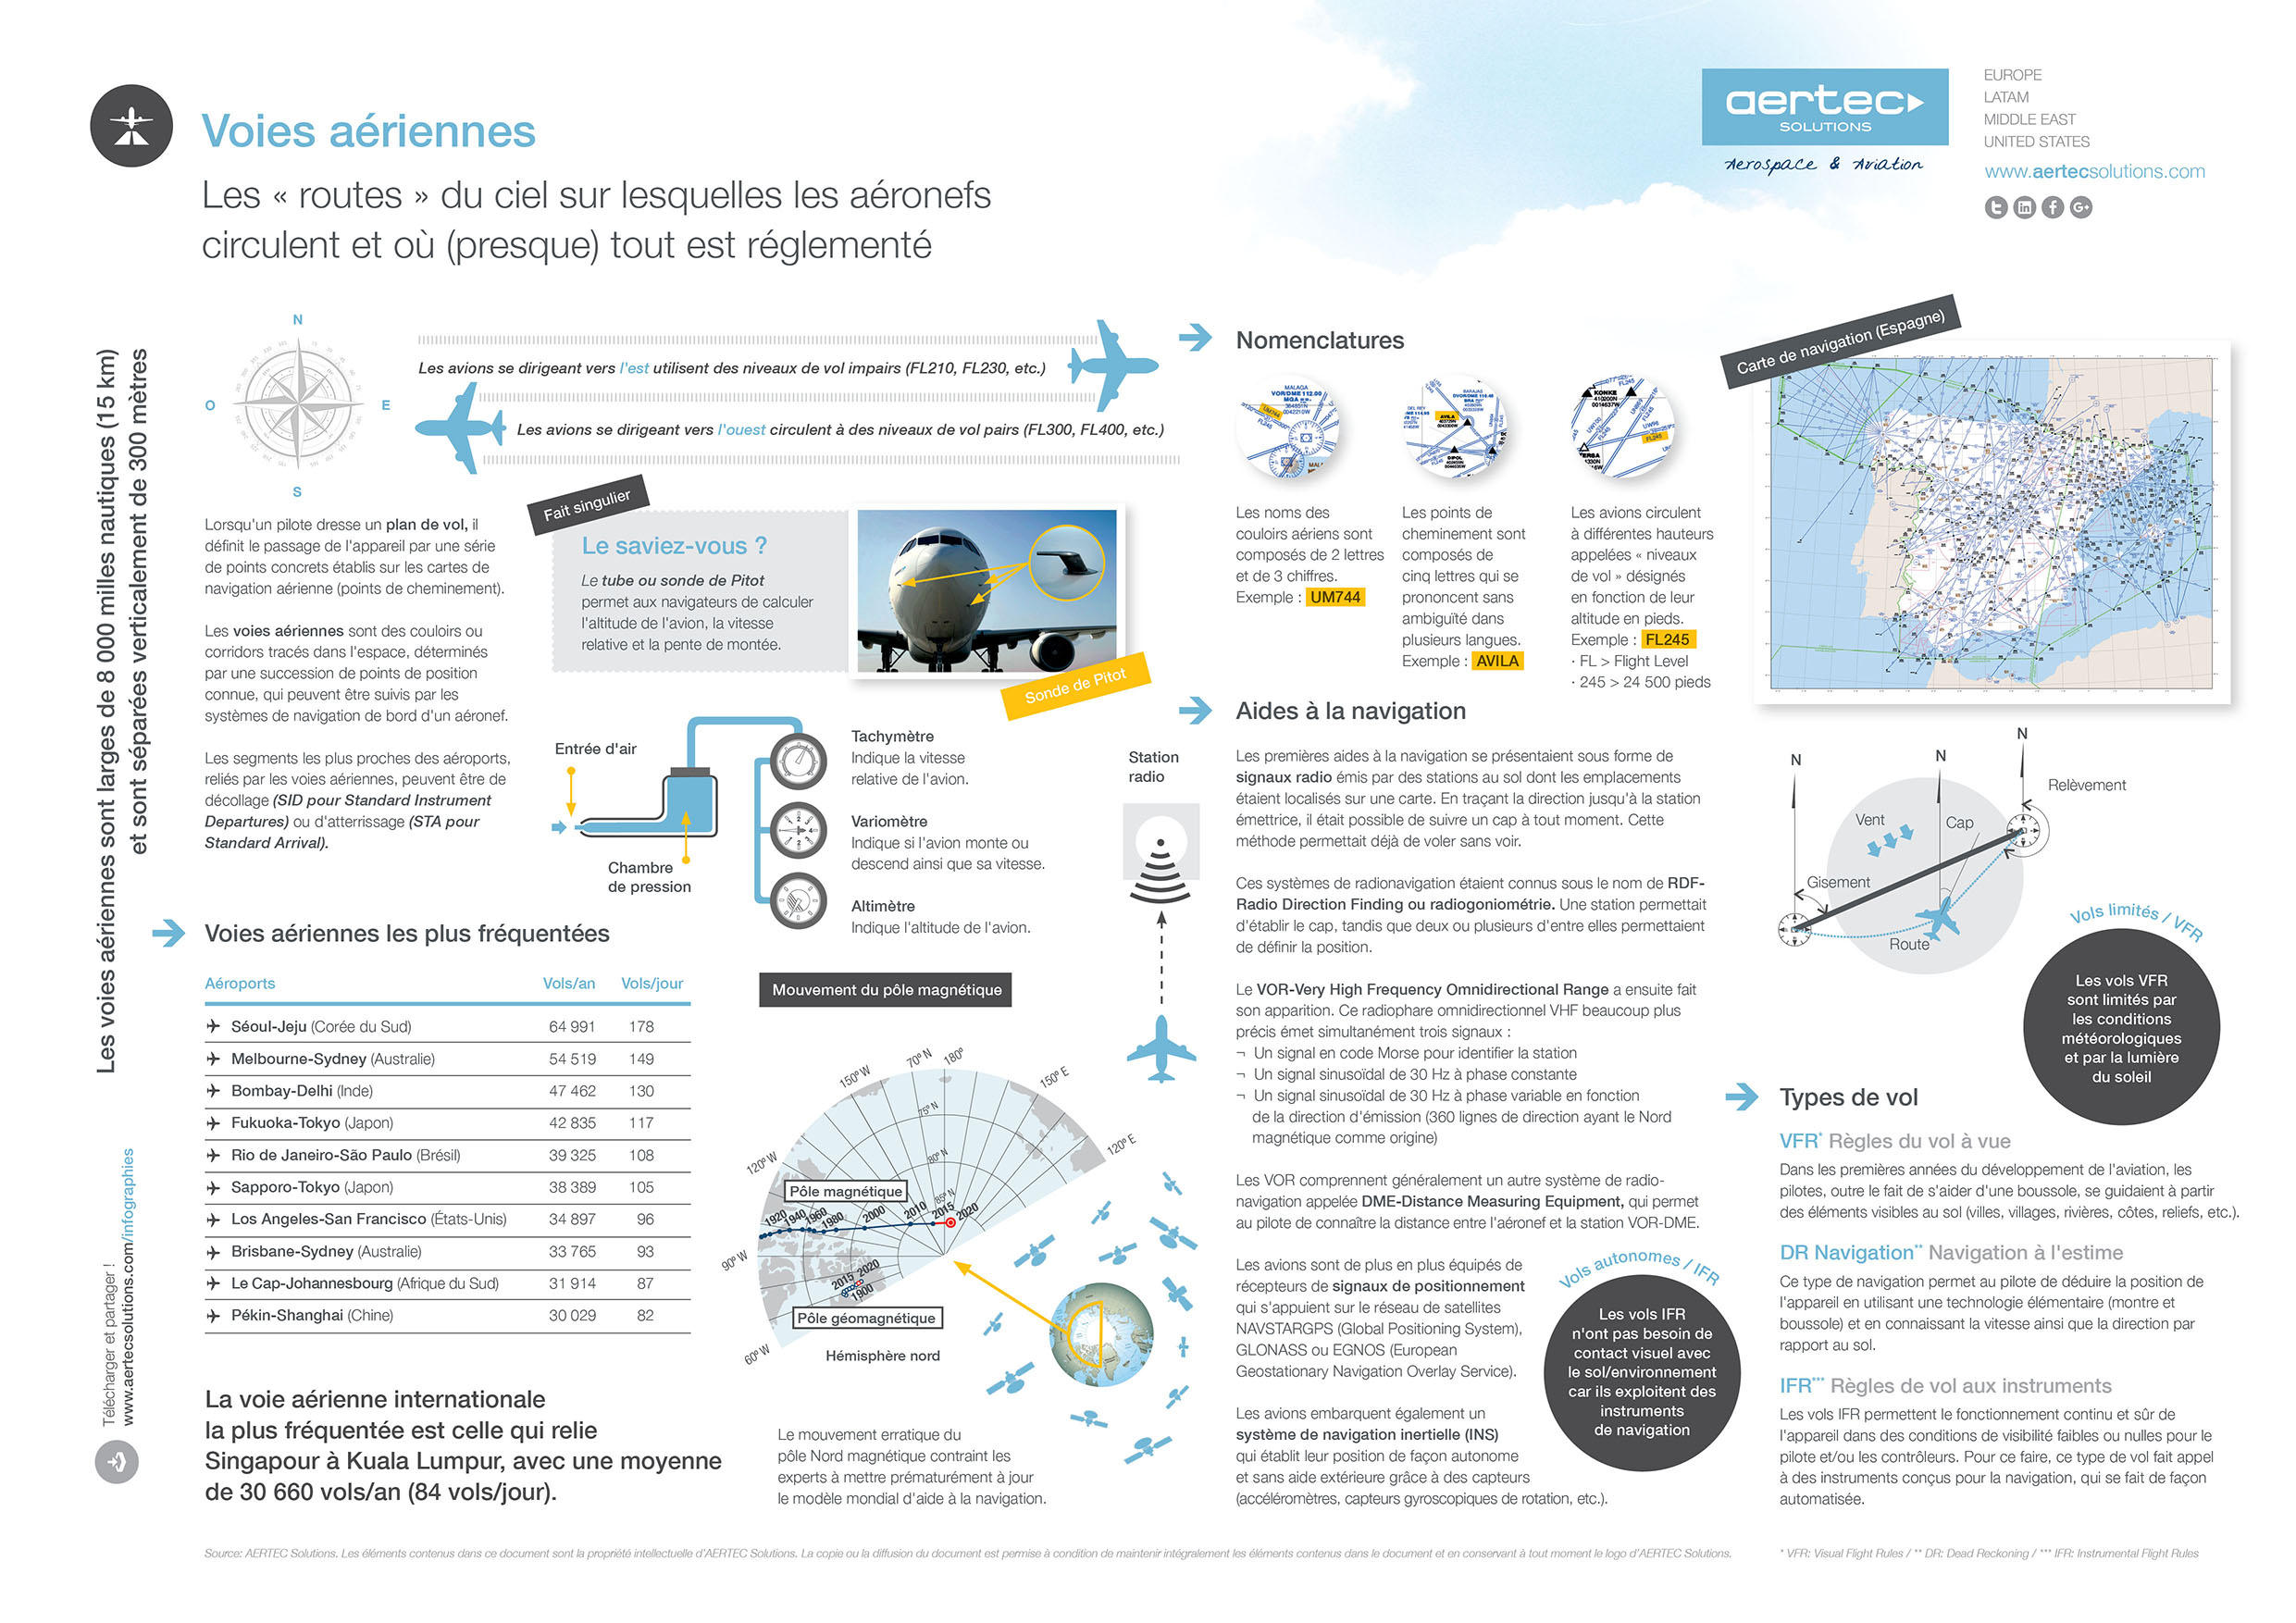 Infographic Air Routes